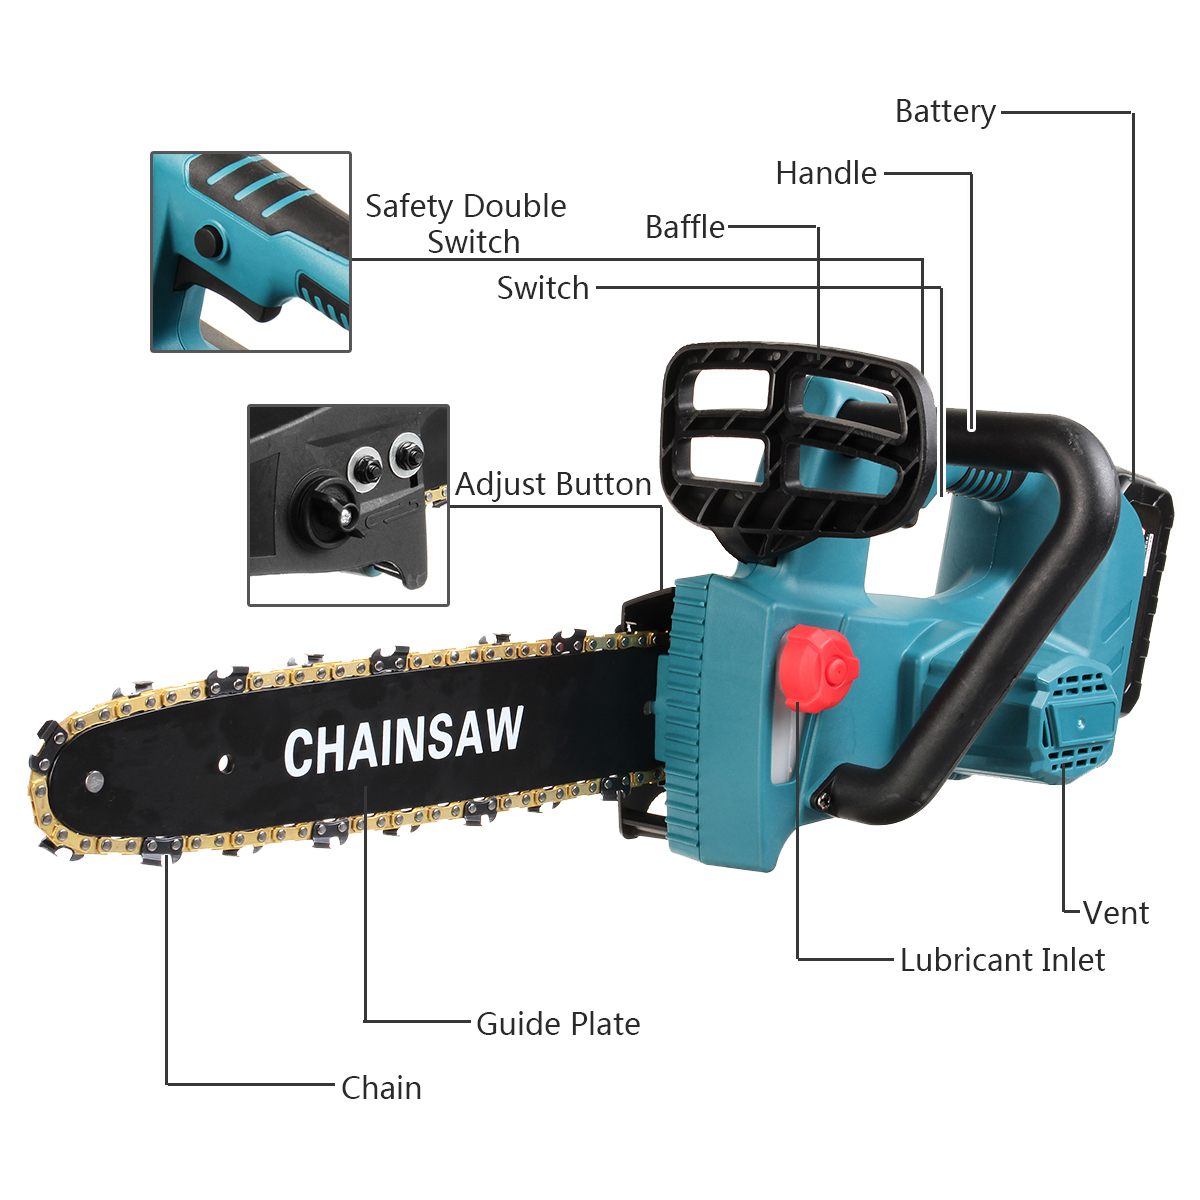 5ms-Portable-Electric-Brushless-Saw-Pruning-Chain-Saw-Rechargeable-Woodworking-Power-Tools-Wood-Cutt-1909228-7